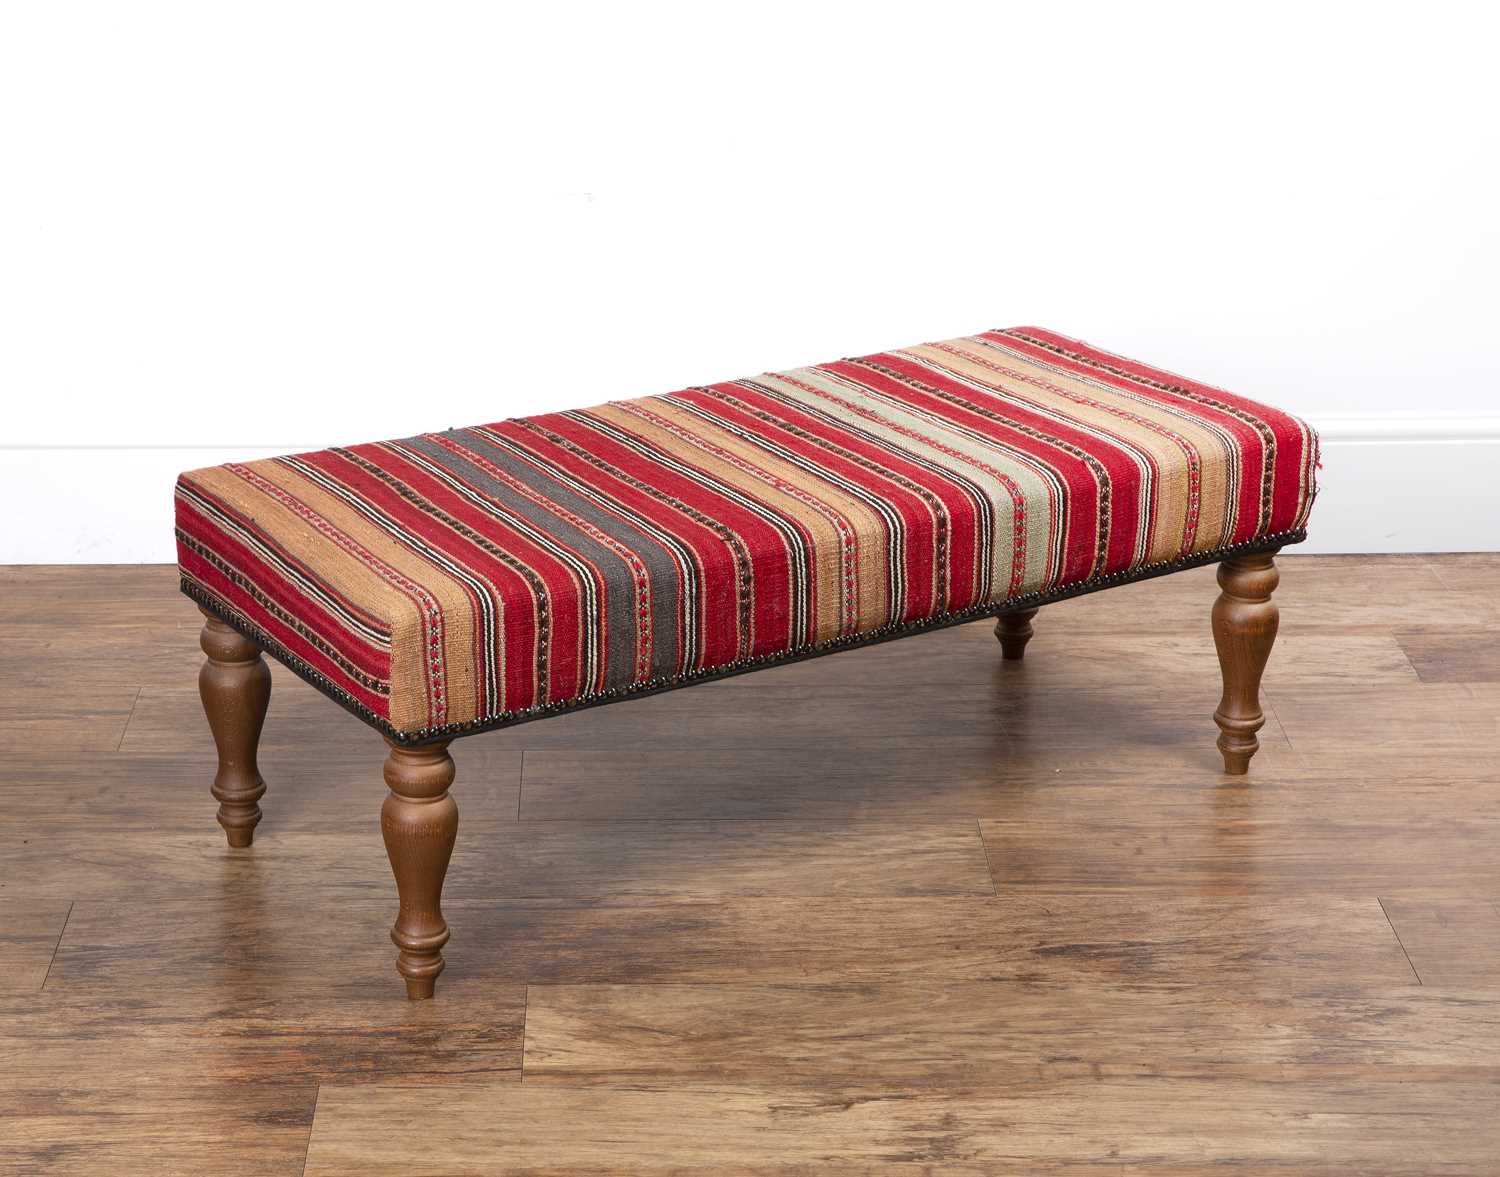 Contemporary footstool with a Kelim type cover, 102cm long x 46cm deep x 38cm high Provenance: The